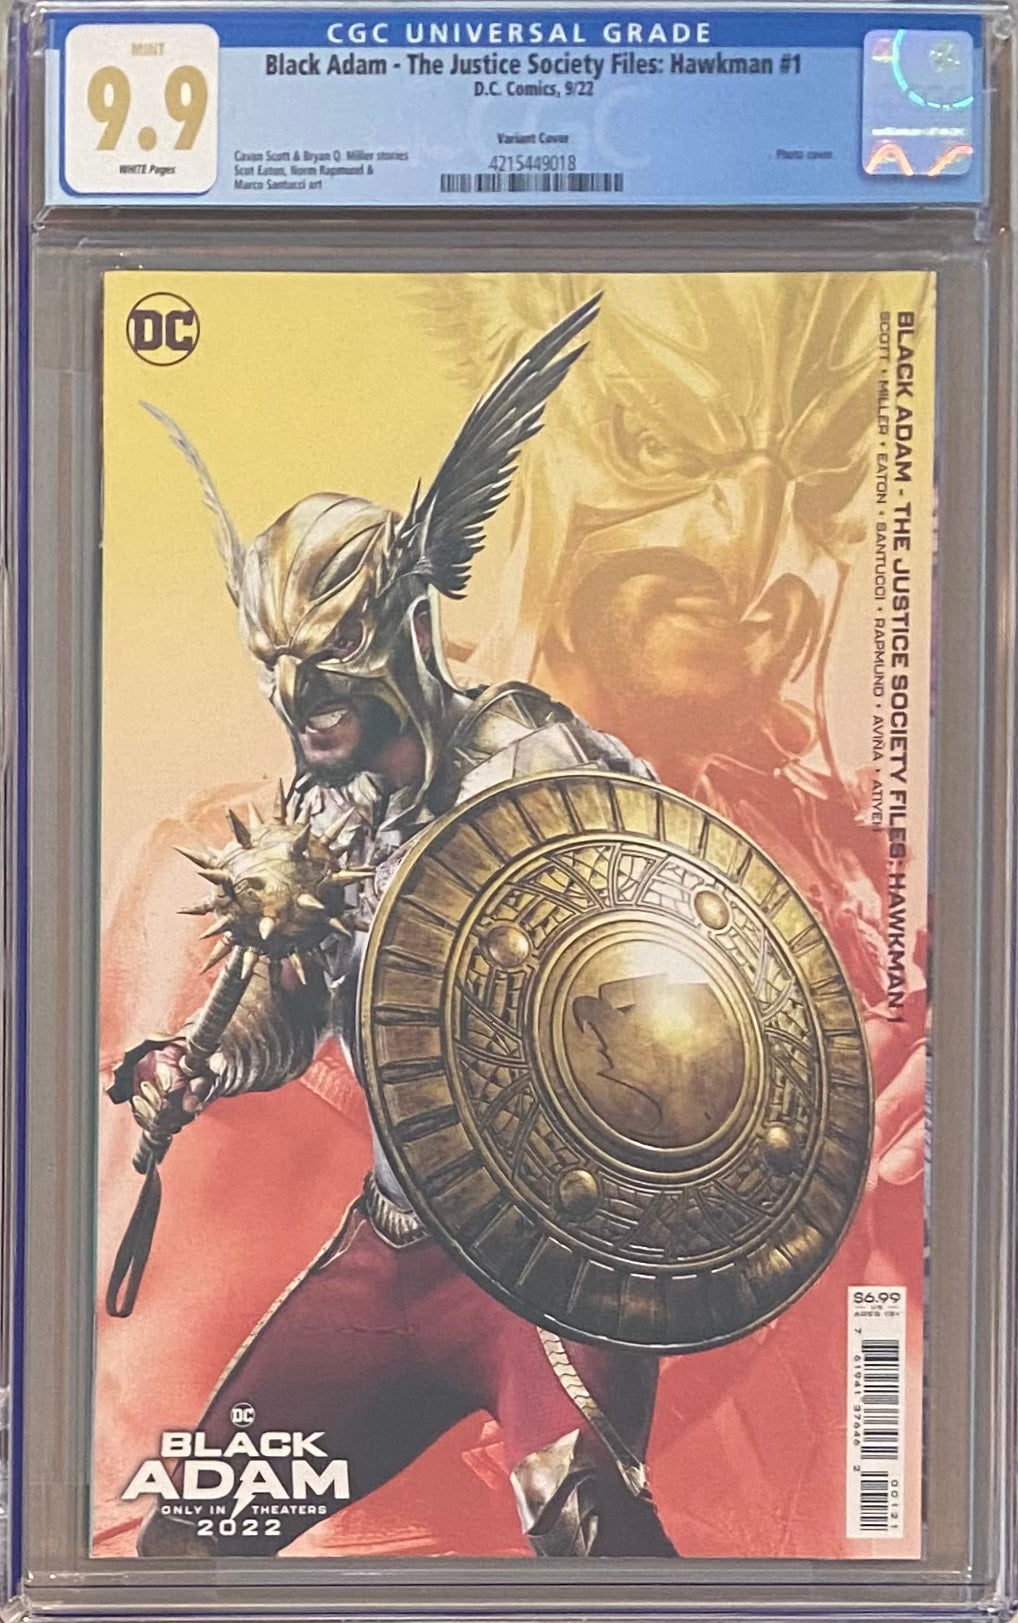 Black Adam: The Justice Society Files - Hawkman #1 Photo Cover Variant CGC 9.9